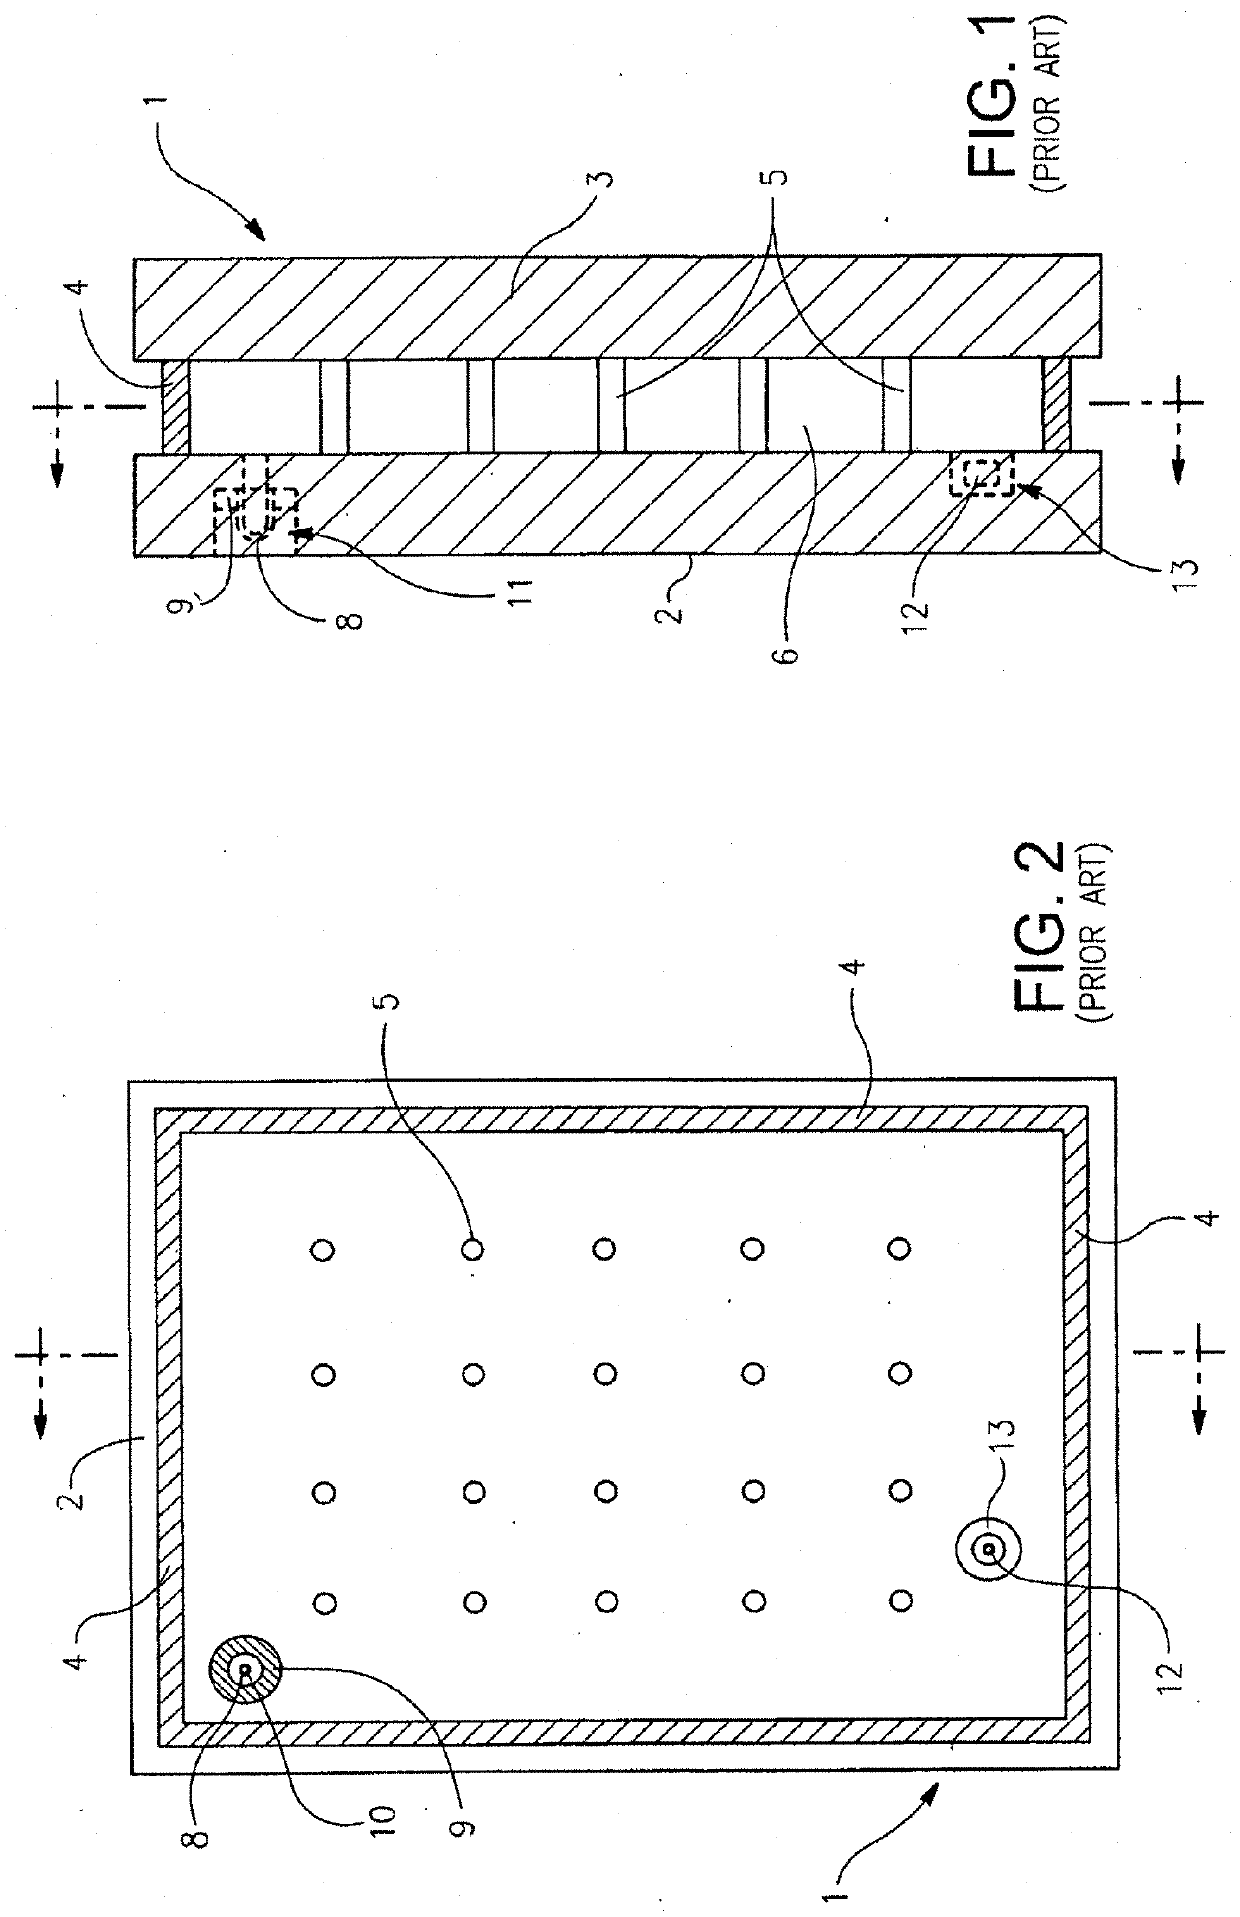 Internal tube for vacuum insulated glass (VIG) unit evacuation and hermetic sealing, vig unit including internal tube, and associated methods